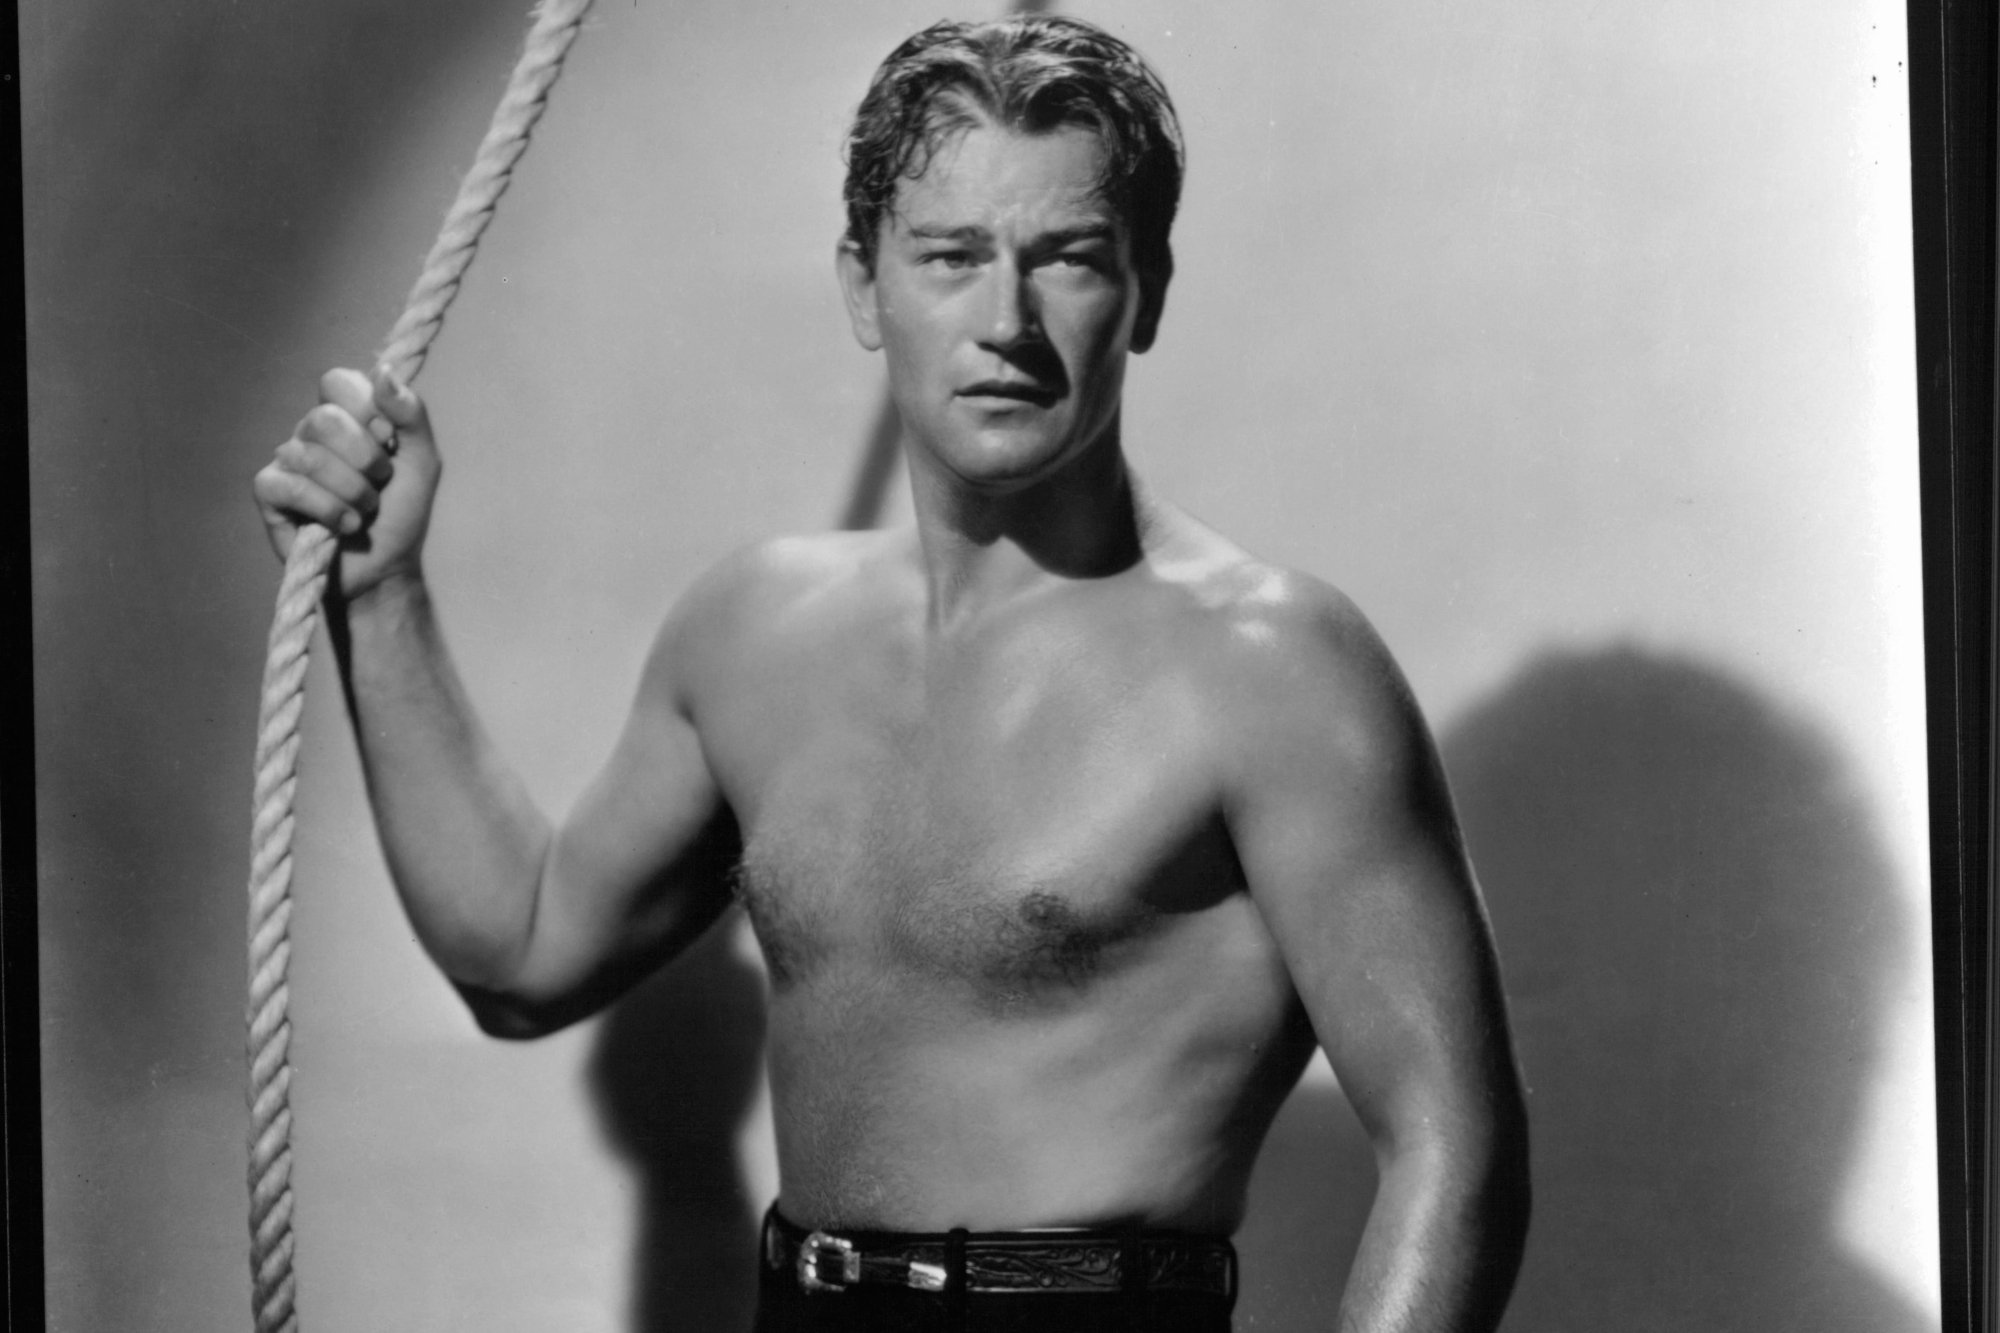 John Wayne, whose works have been called queer 'erotic spectacle.' He's shirtless in a black-and-white picture, holding onto a rope.